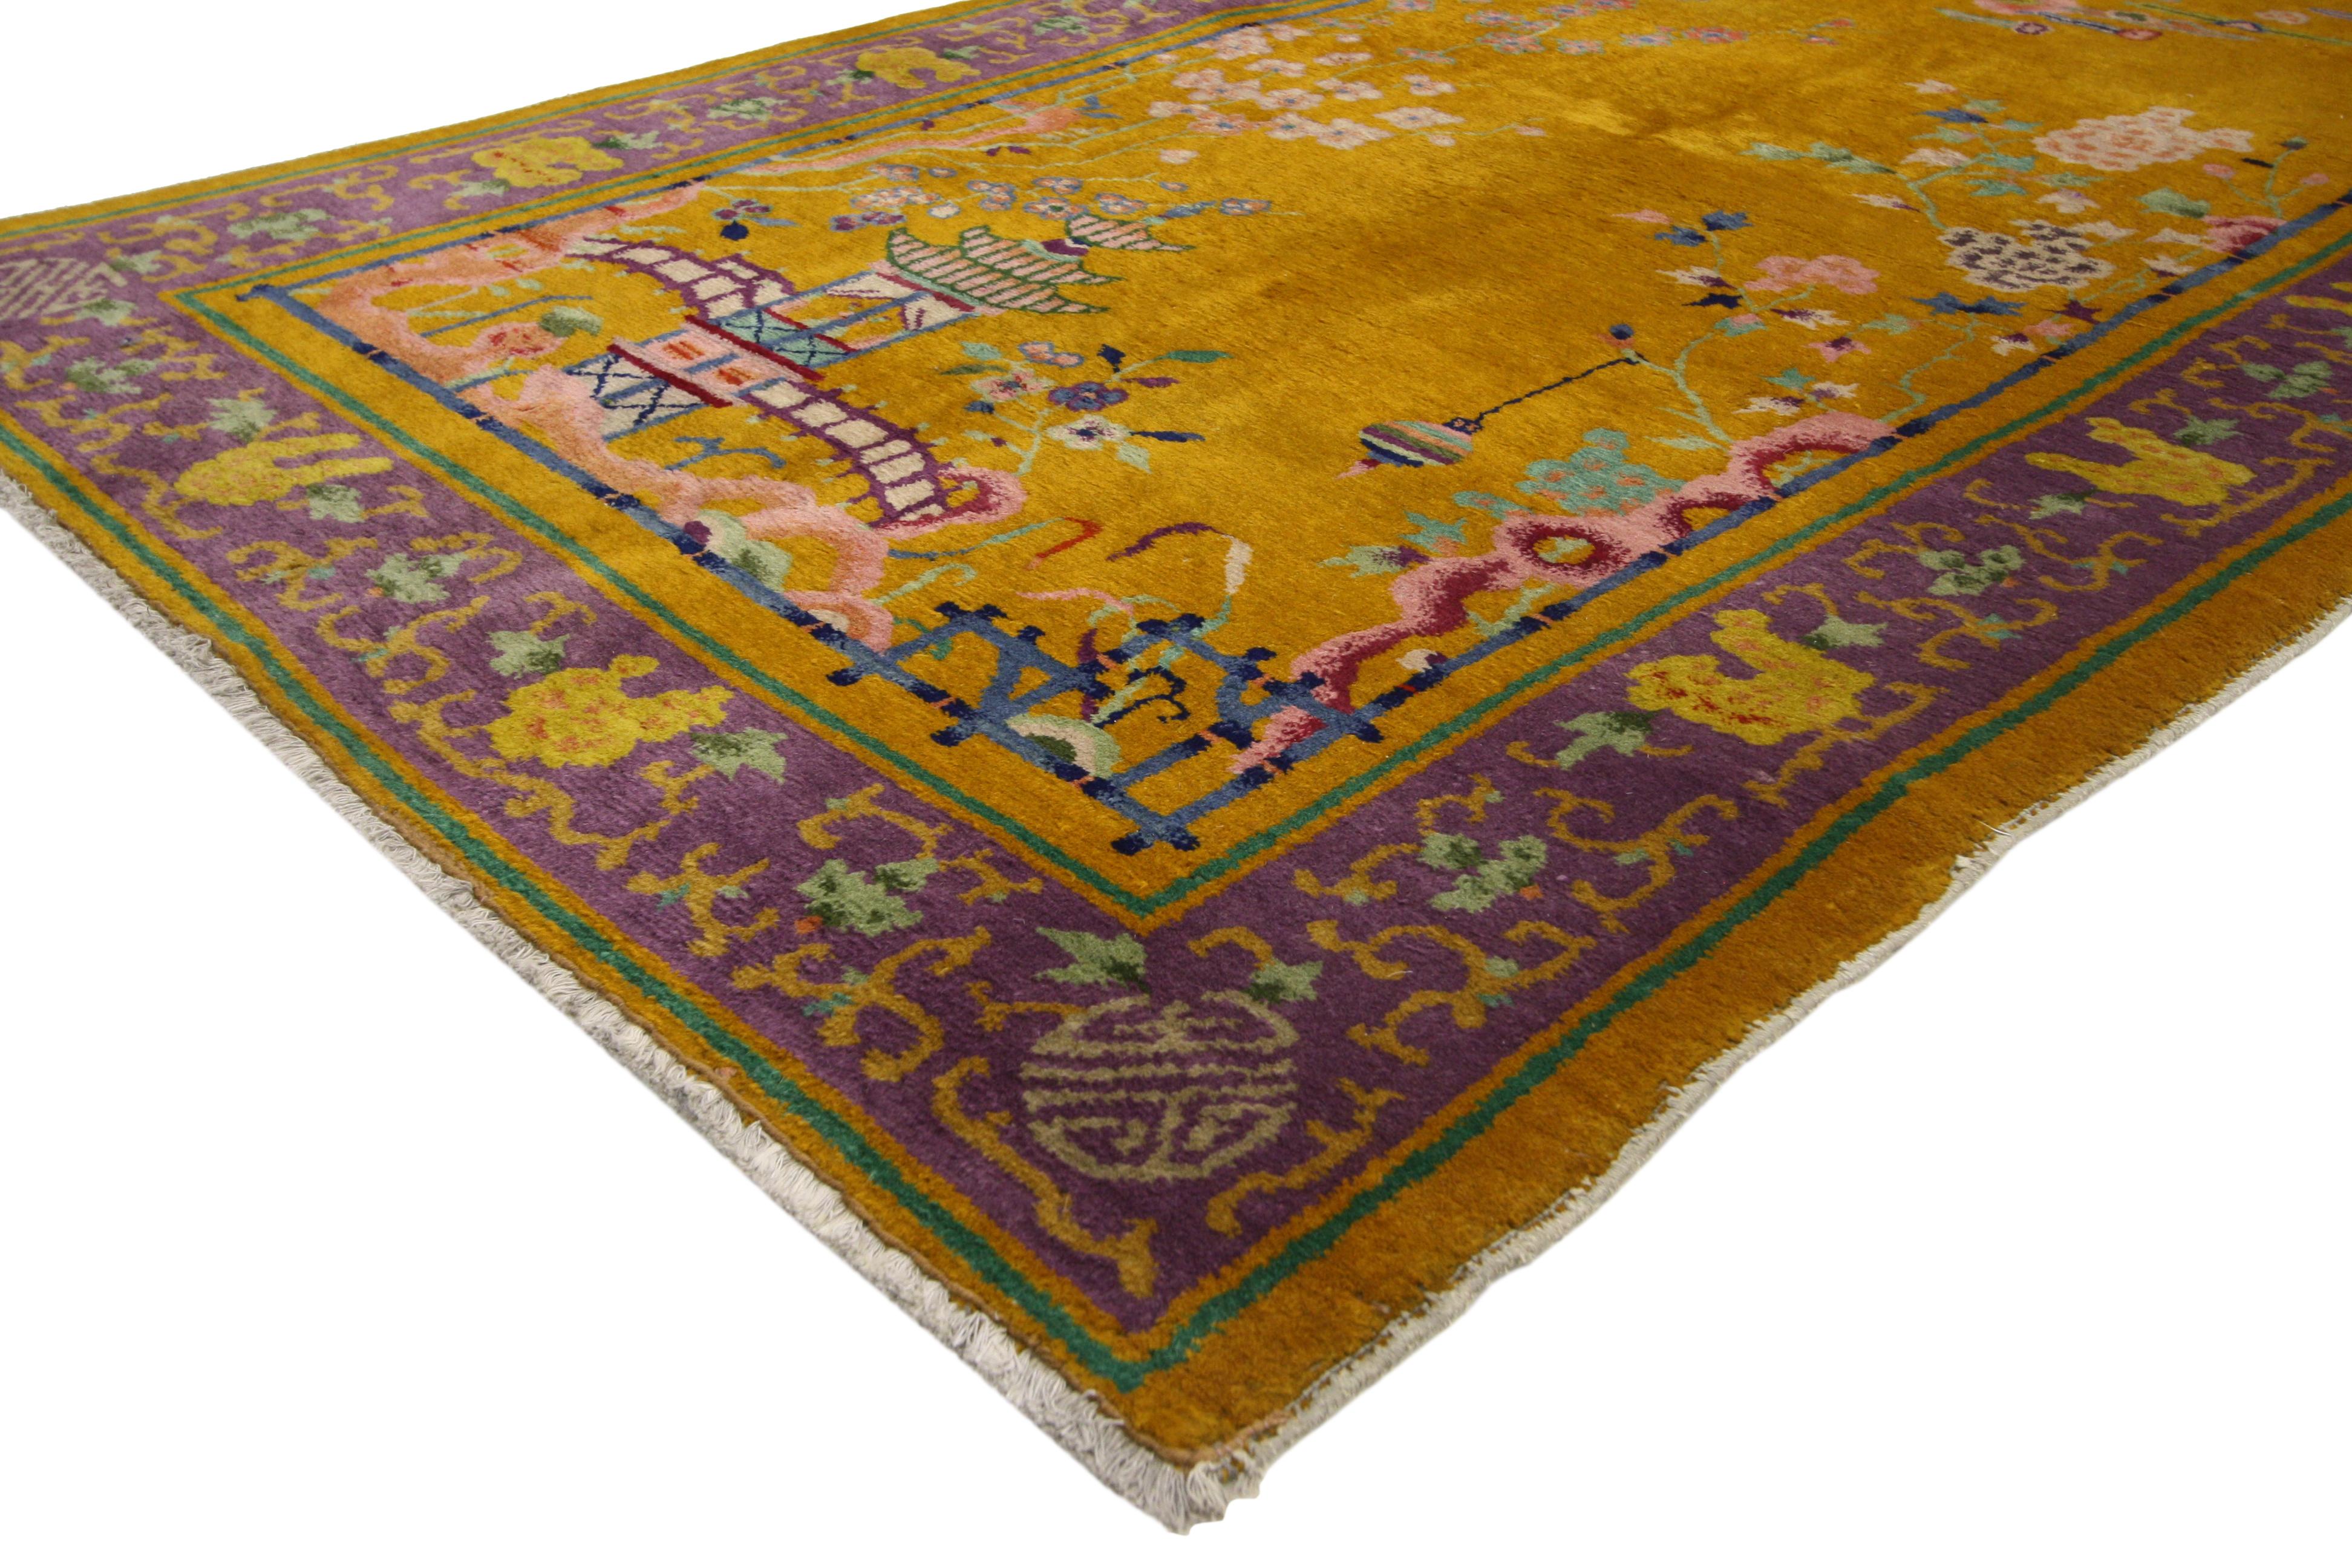 Wool Antique Chinese Peking Rug with with Pagoda and Chinese Art Deco Style